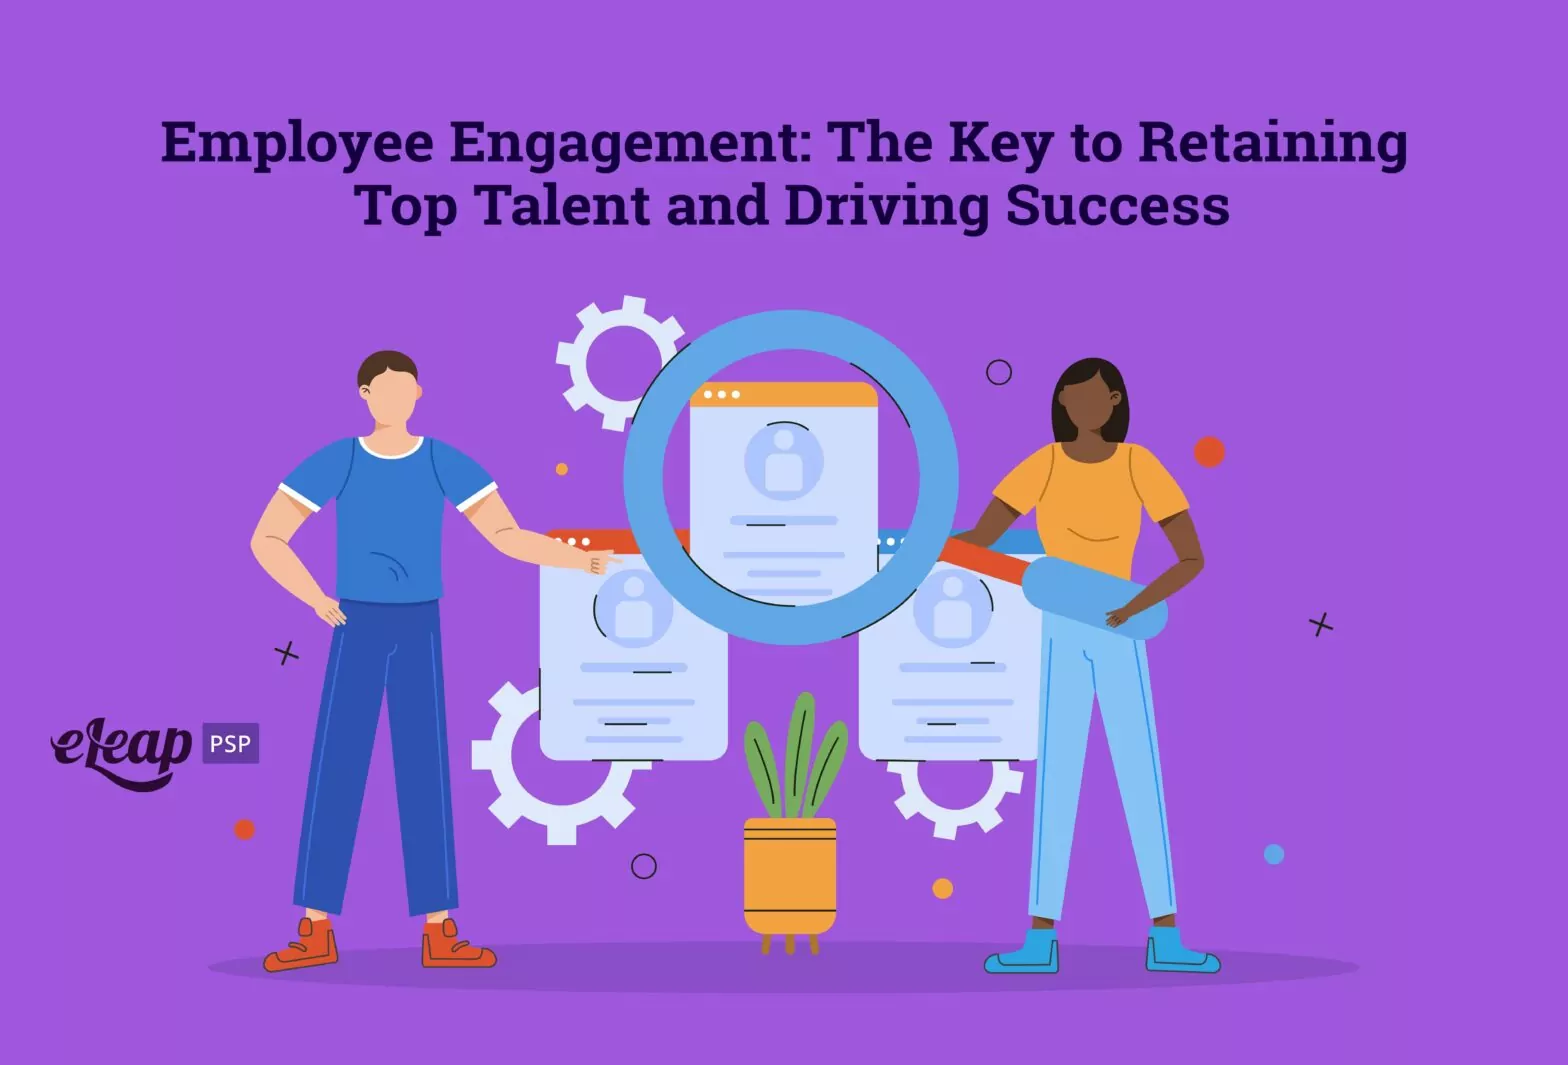 Employee Engagement: The Key to Retaining Top Talent and Driving Success